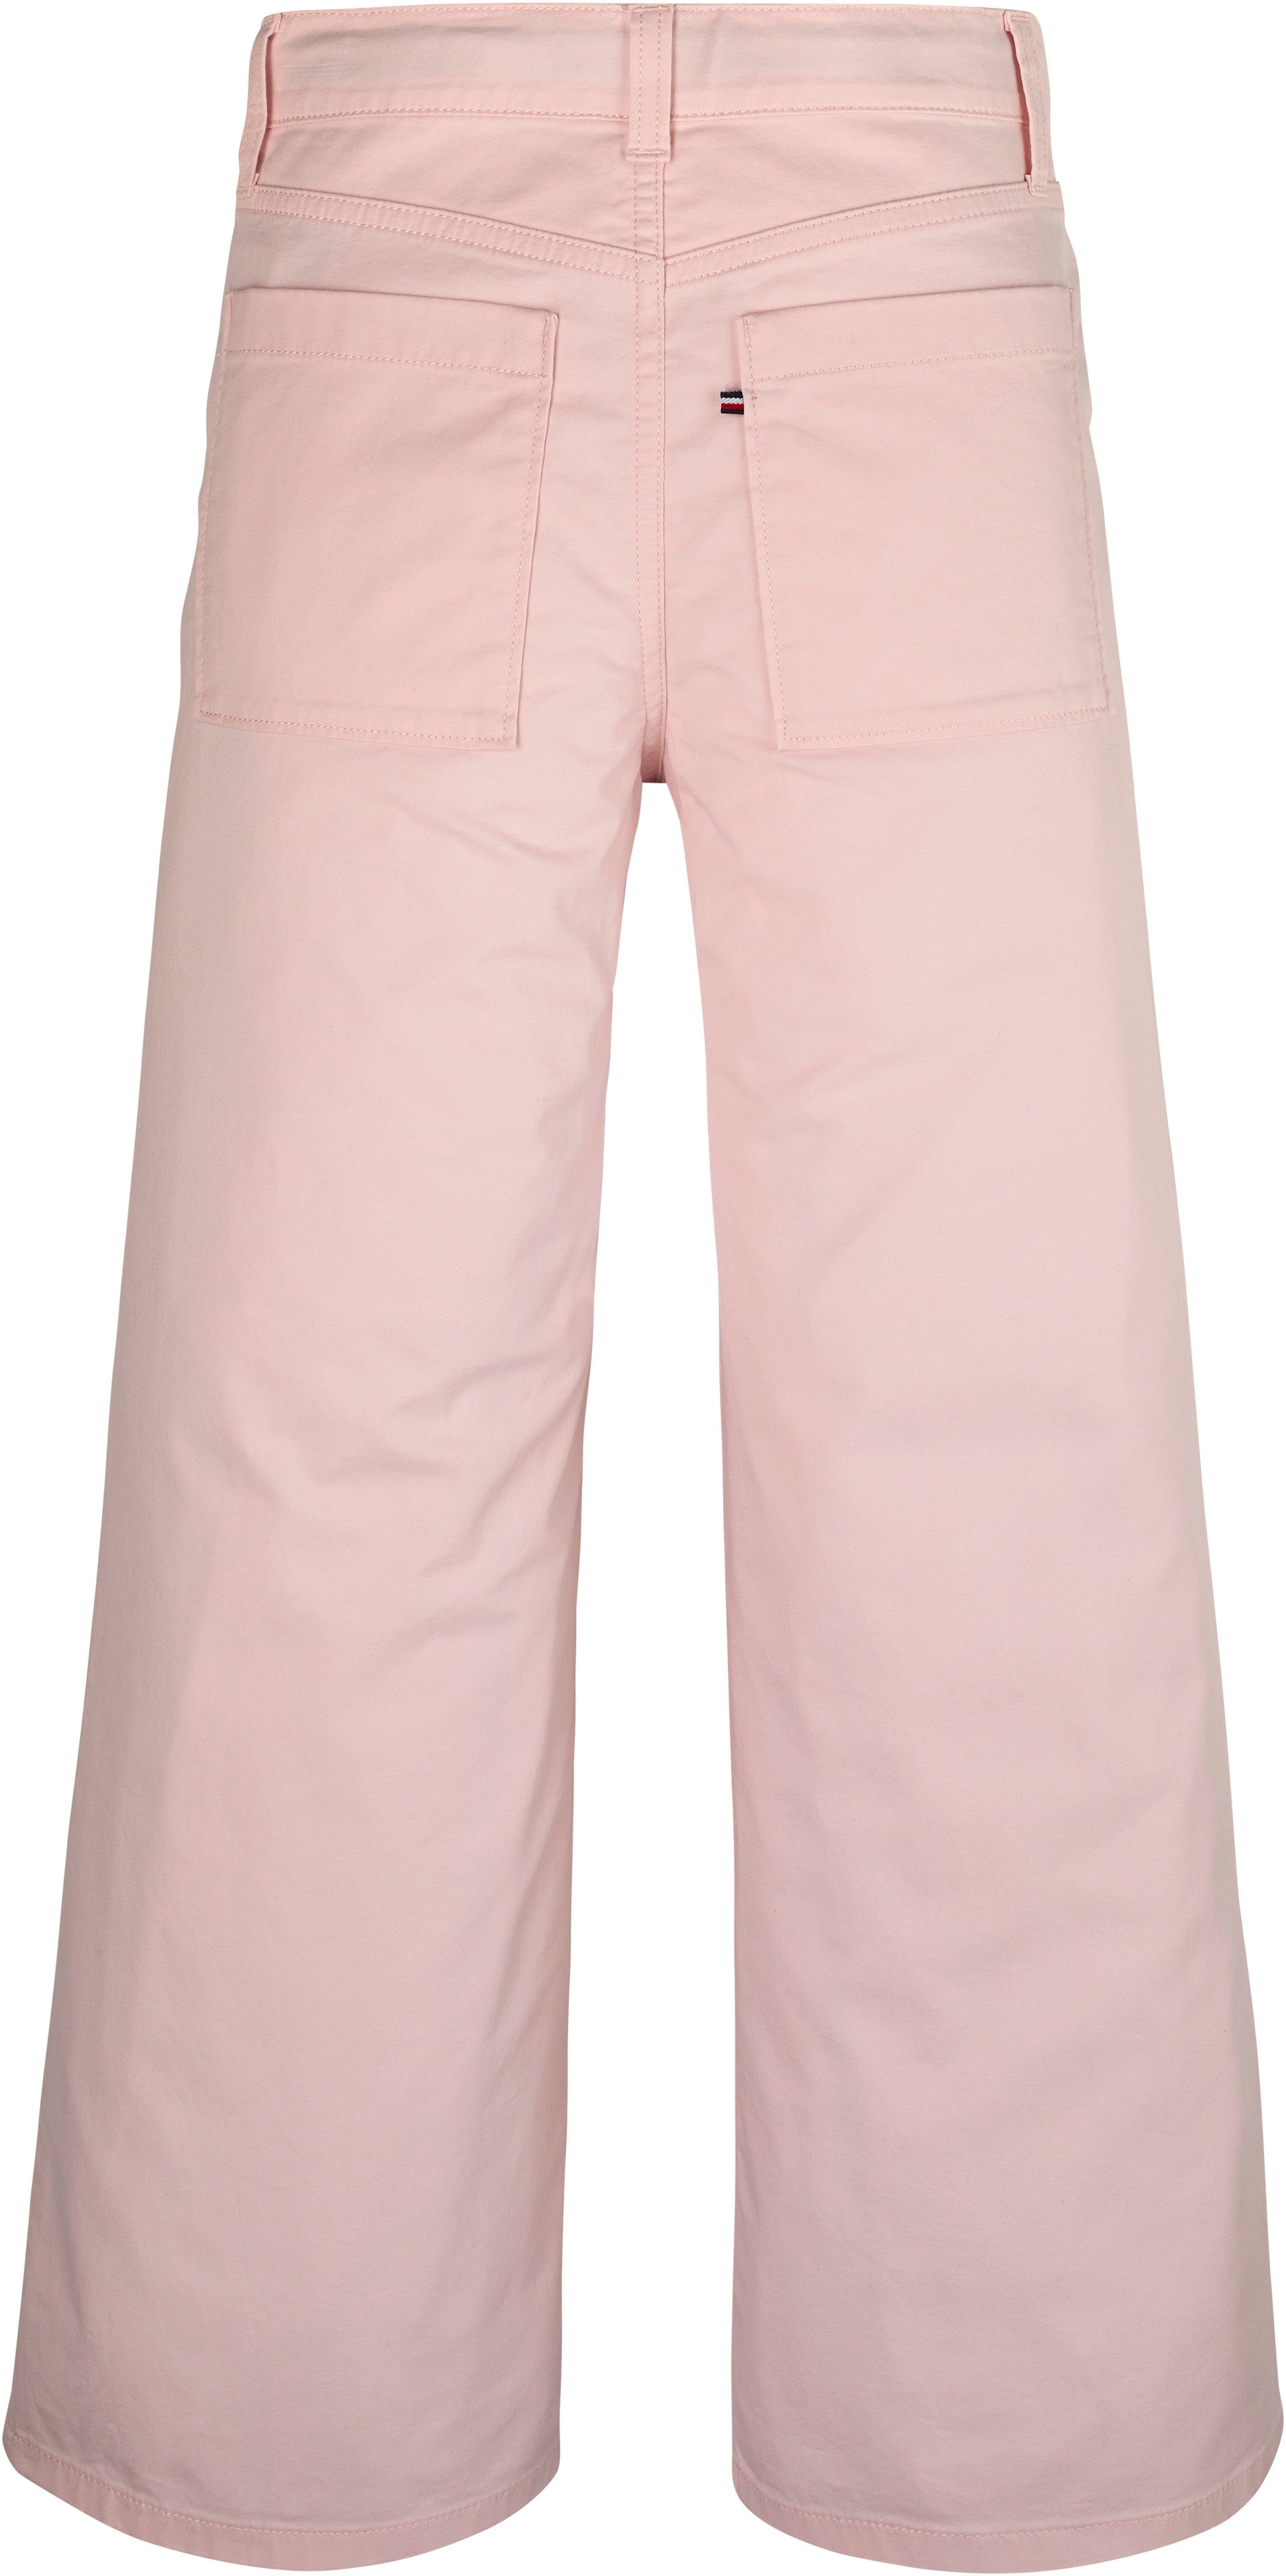 MABEL Chinohose Unifarbe PANT in Tommy Hilfiger CHINO